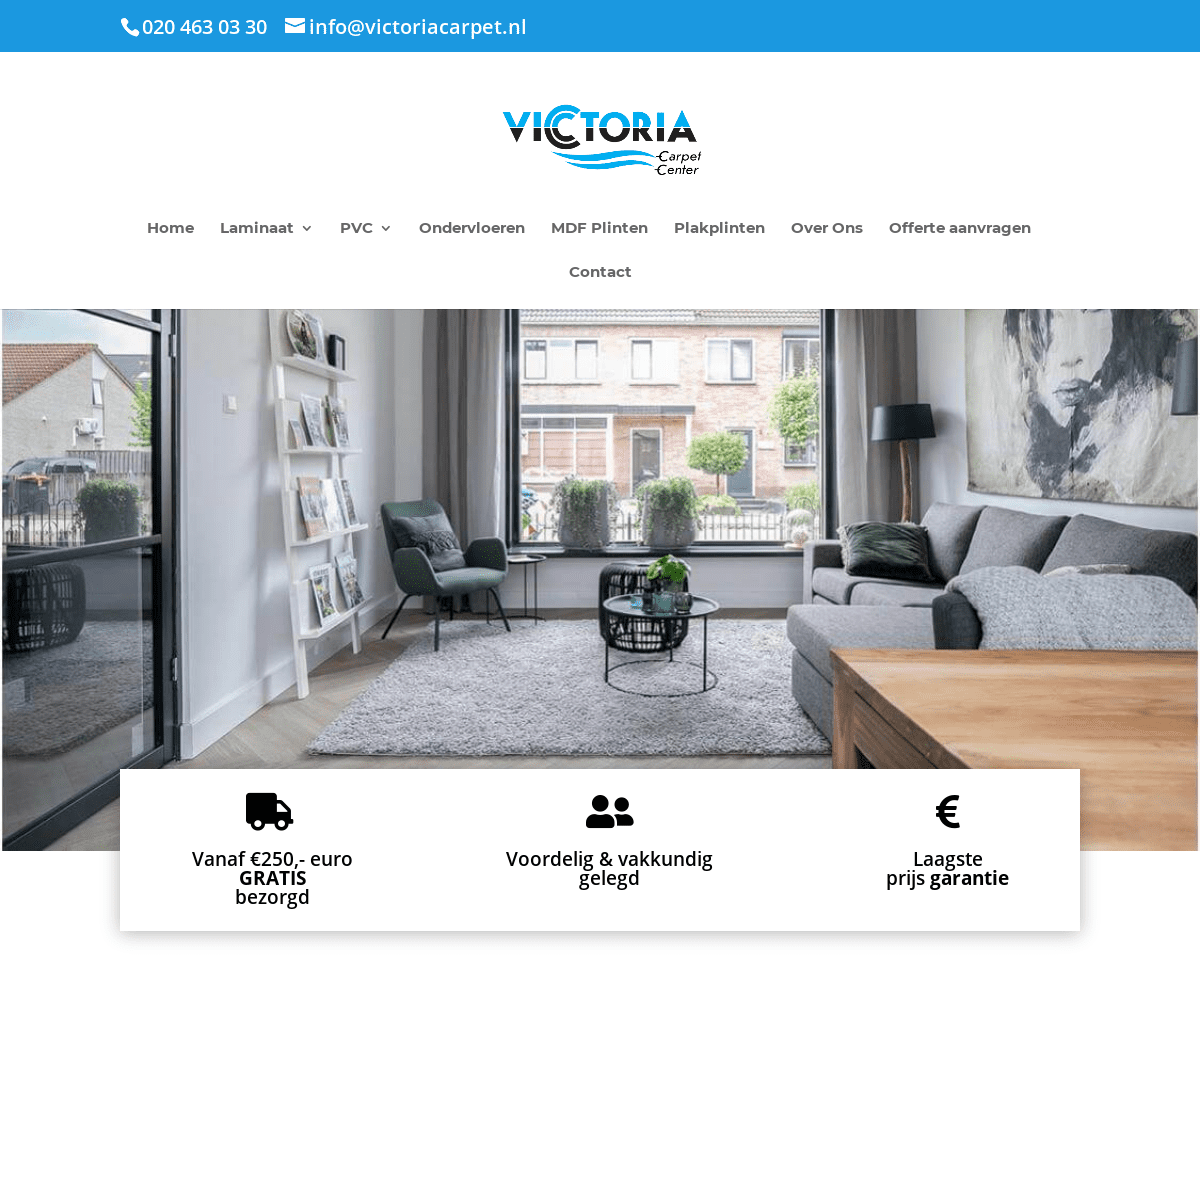 A complete backup of https://victoriacarpet.nl